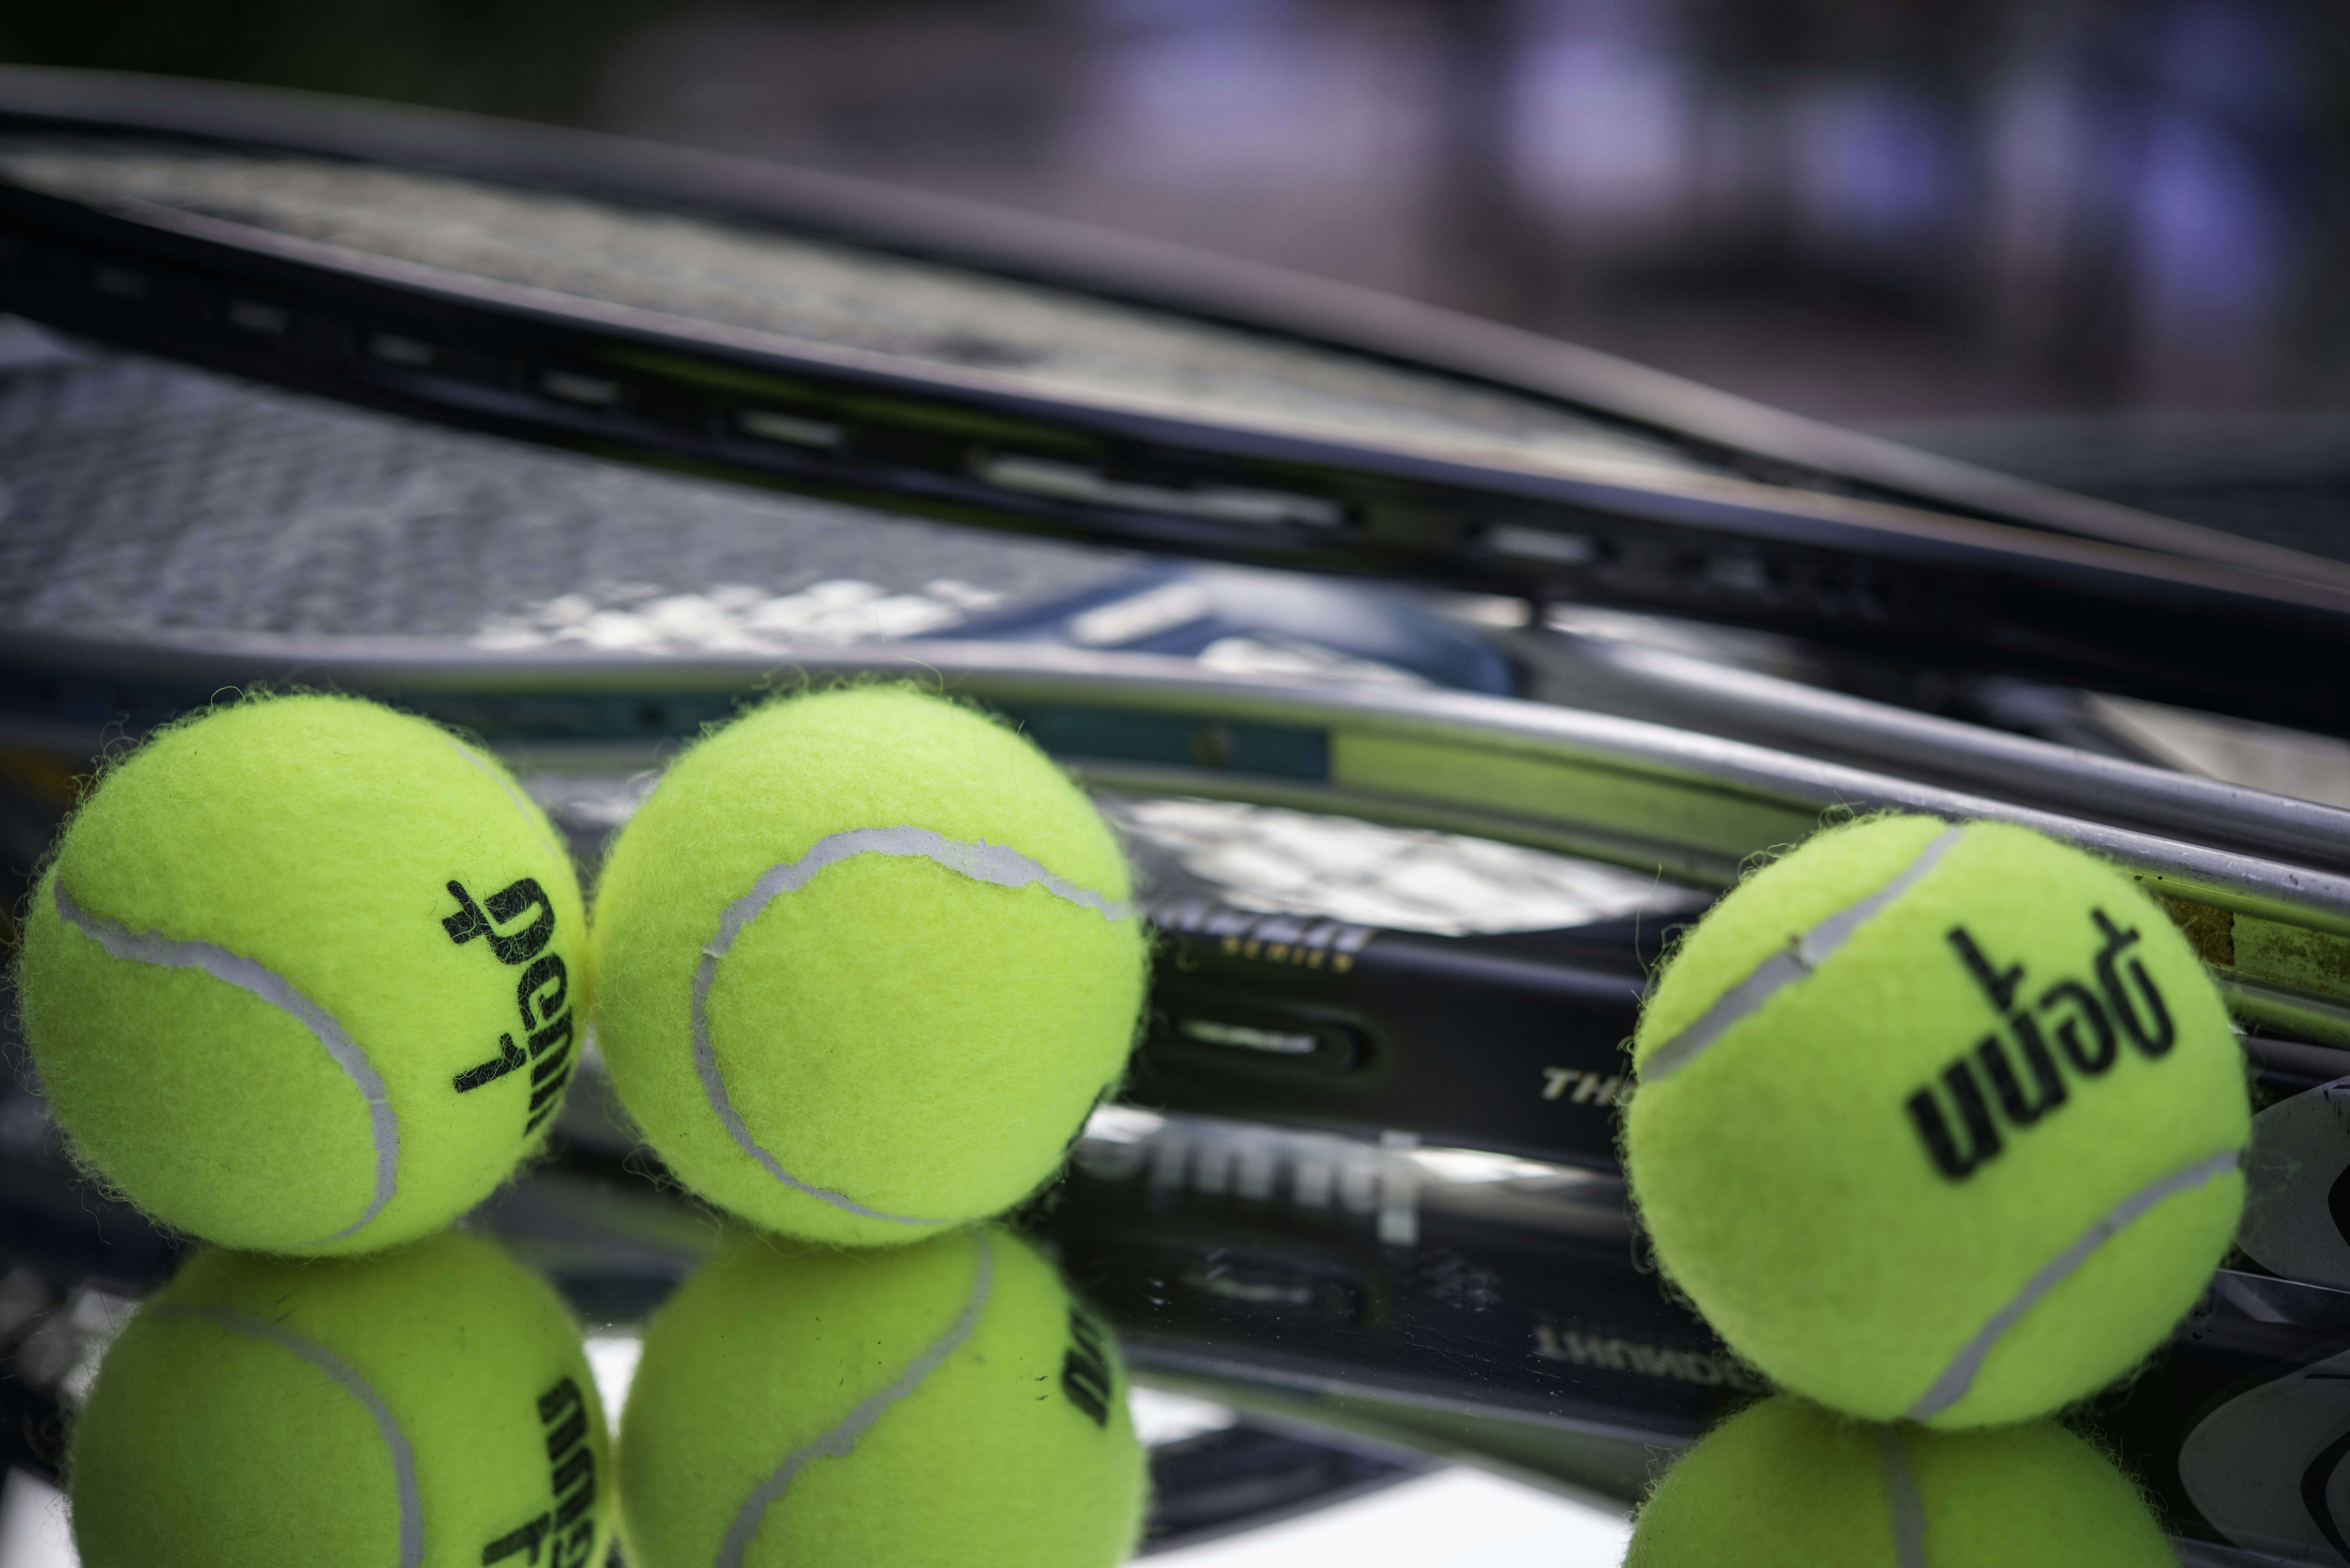 Tennis balls and racquets.